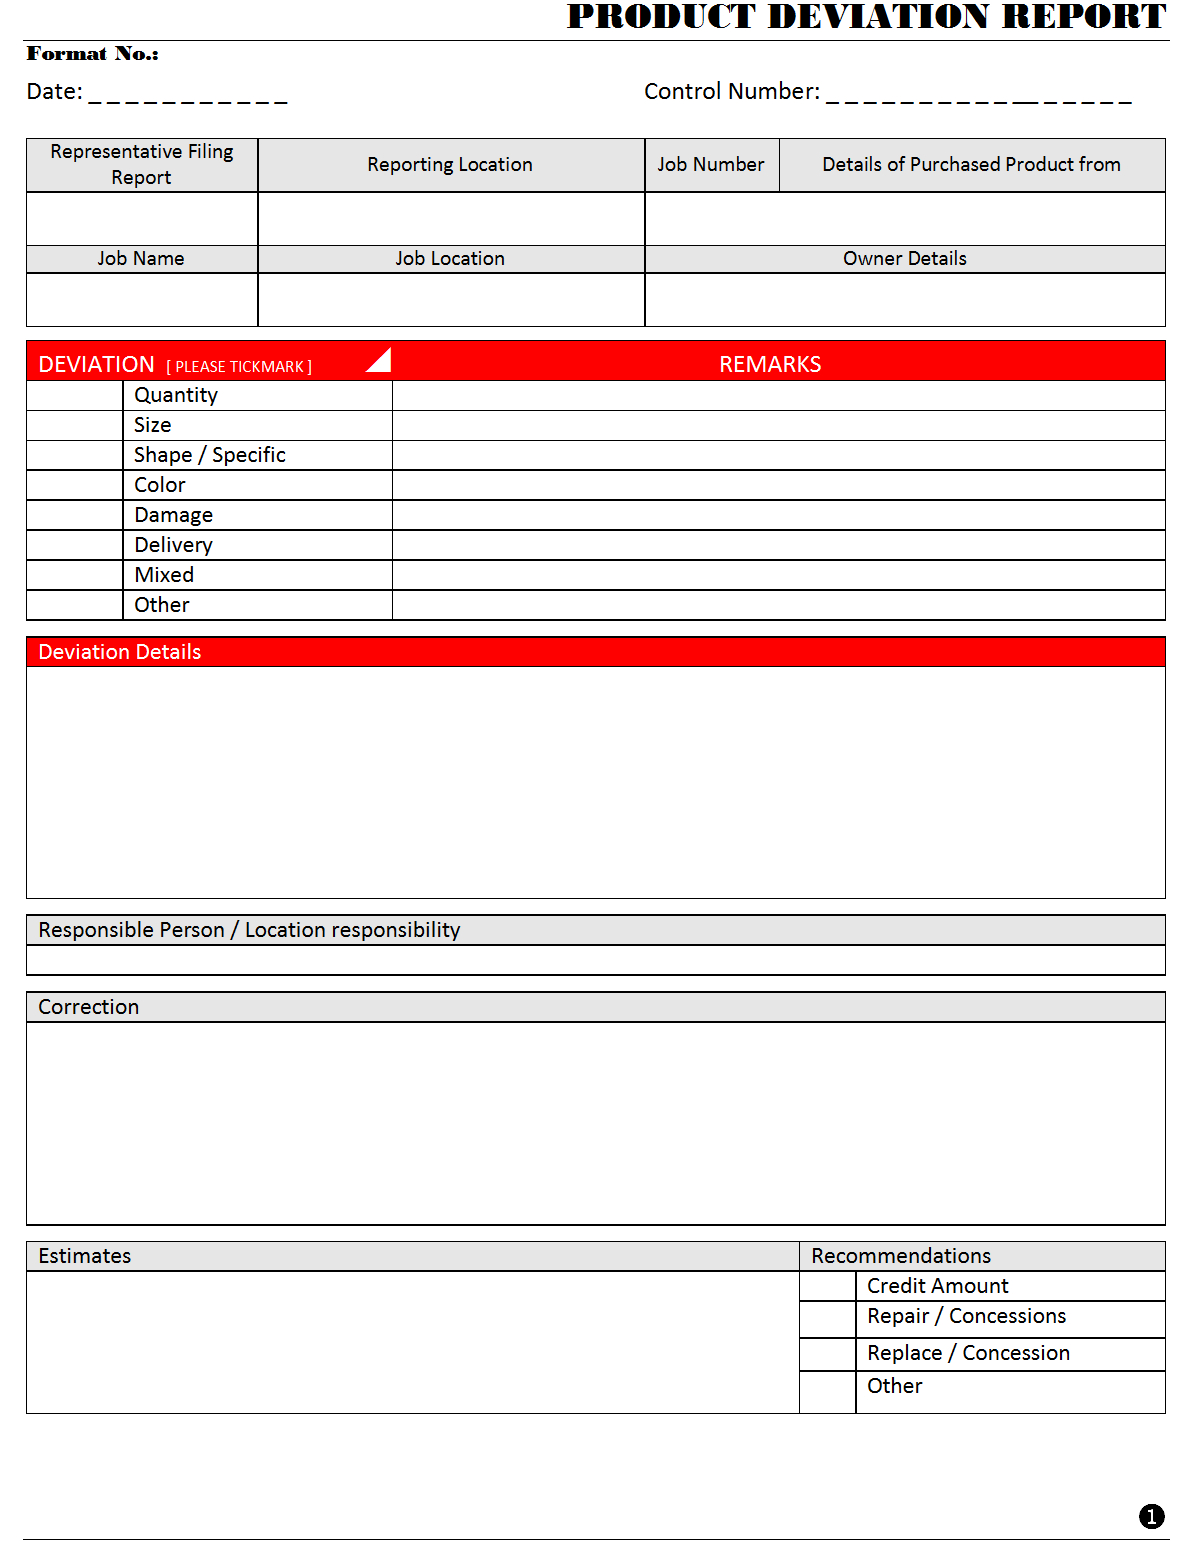 Product Deviation Report - Intended For Deviation Report Template